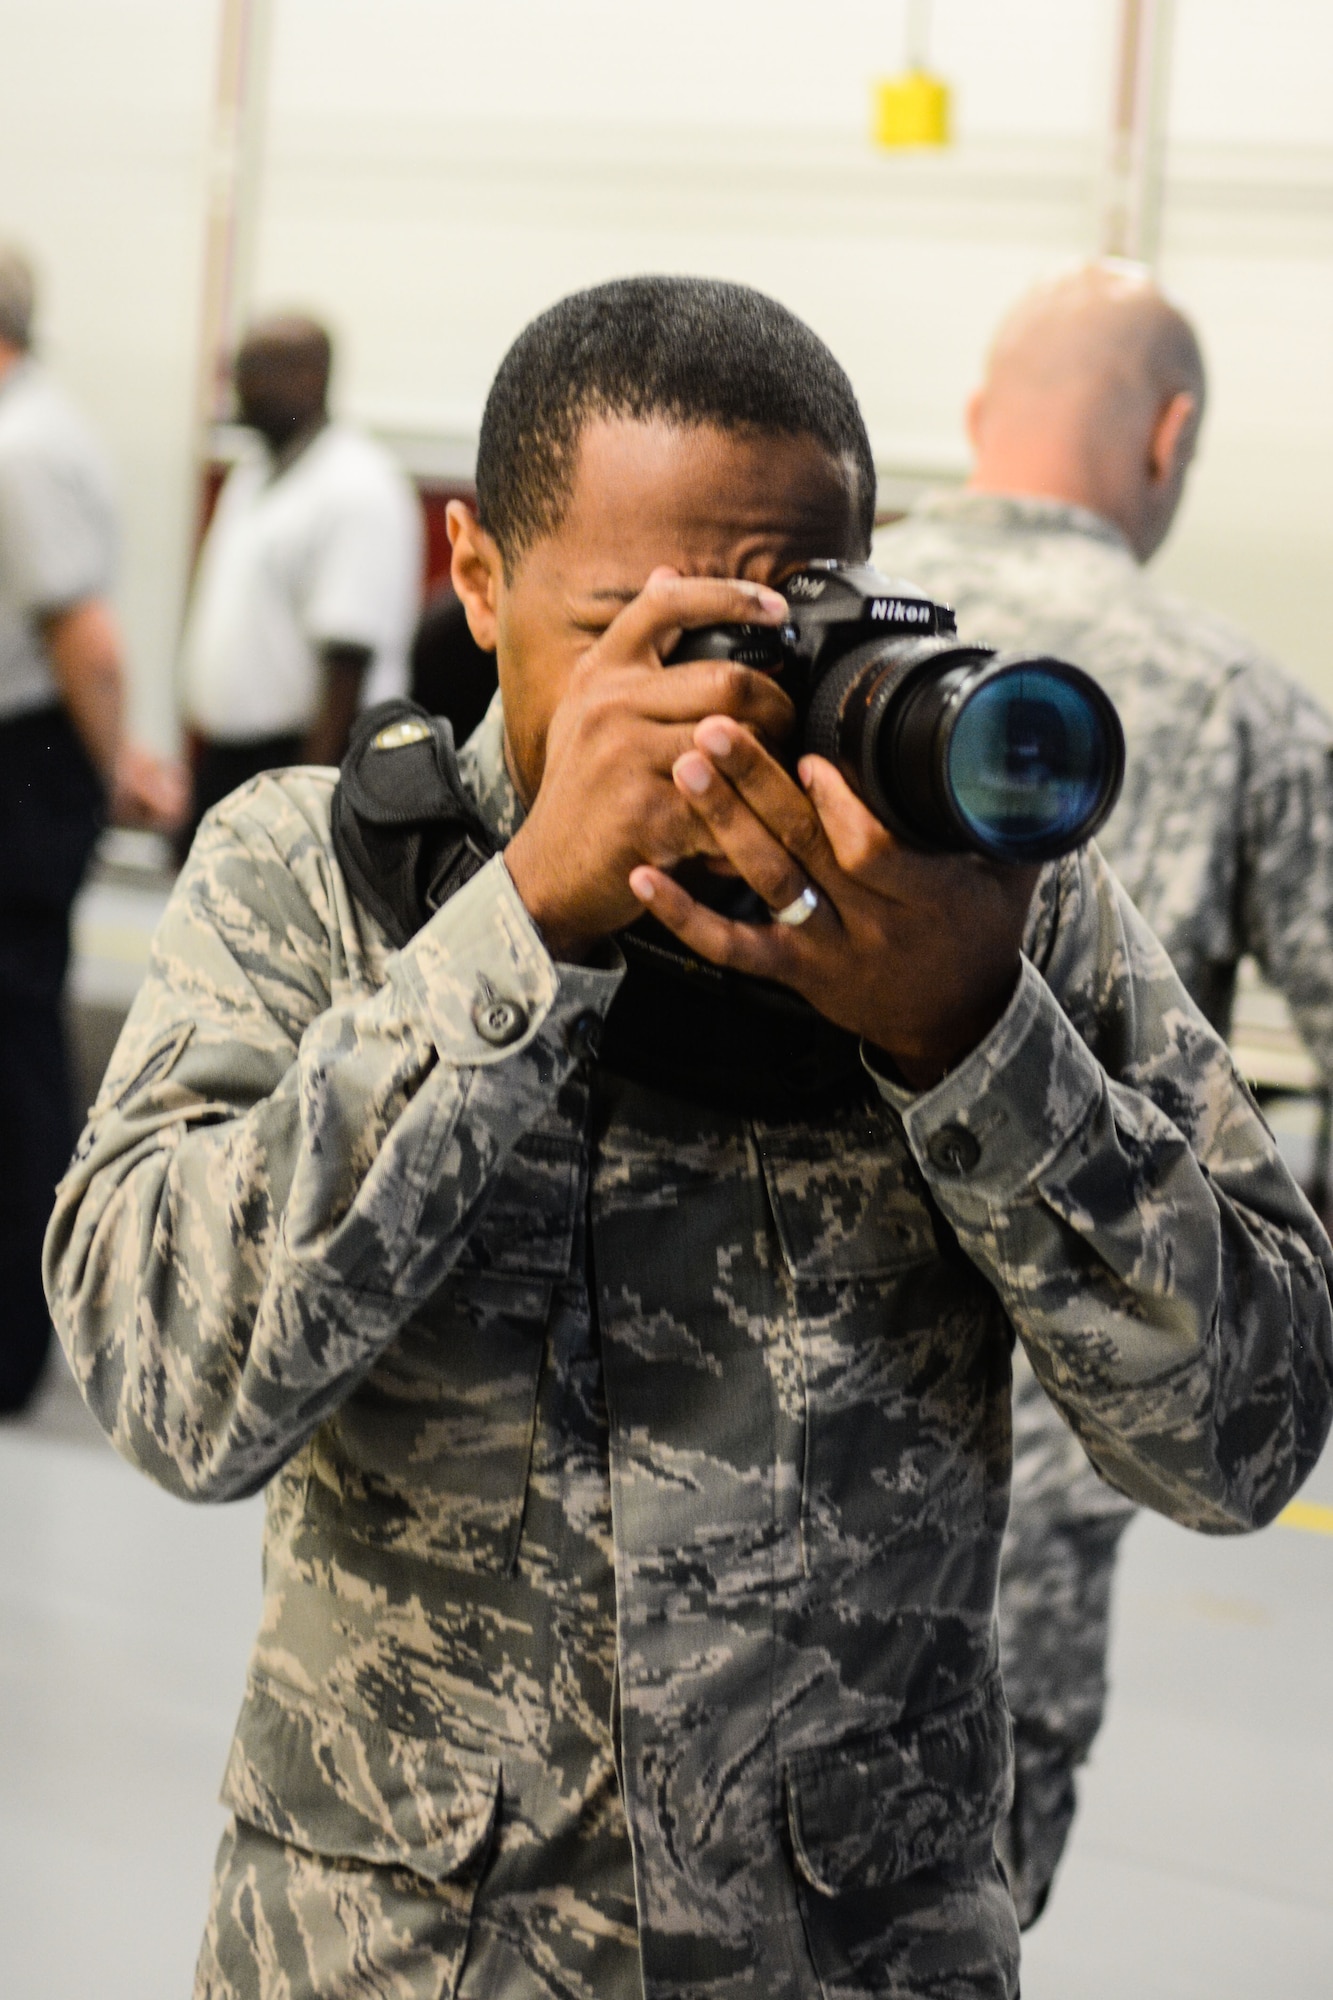 U.S. Air Force Senior Airman Bruce Jenkins, a crew chief assigned to the 139th Maintenance Group, Missouri Air National Guard, photographs an event at Rosecrans Air National Guard Base, St. Joseph, Mo., June 3, 2015. Jenkins is a temporary technician assigned to the 139th Public Affairs Office as an audiovisual production specialist. (U.S. Air National Guard photo by Tech. Sgt. Michael Crane)